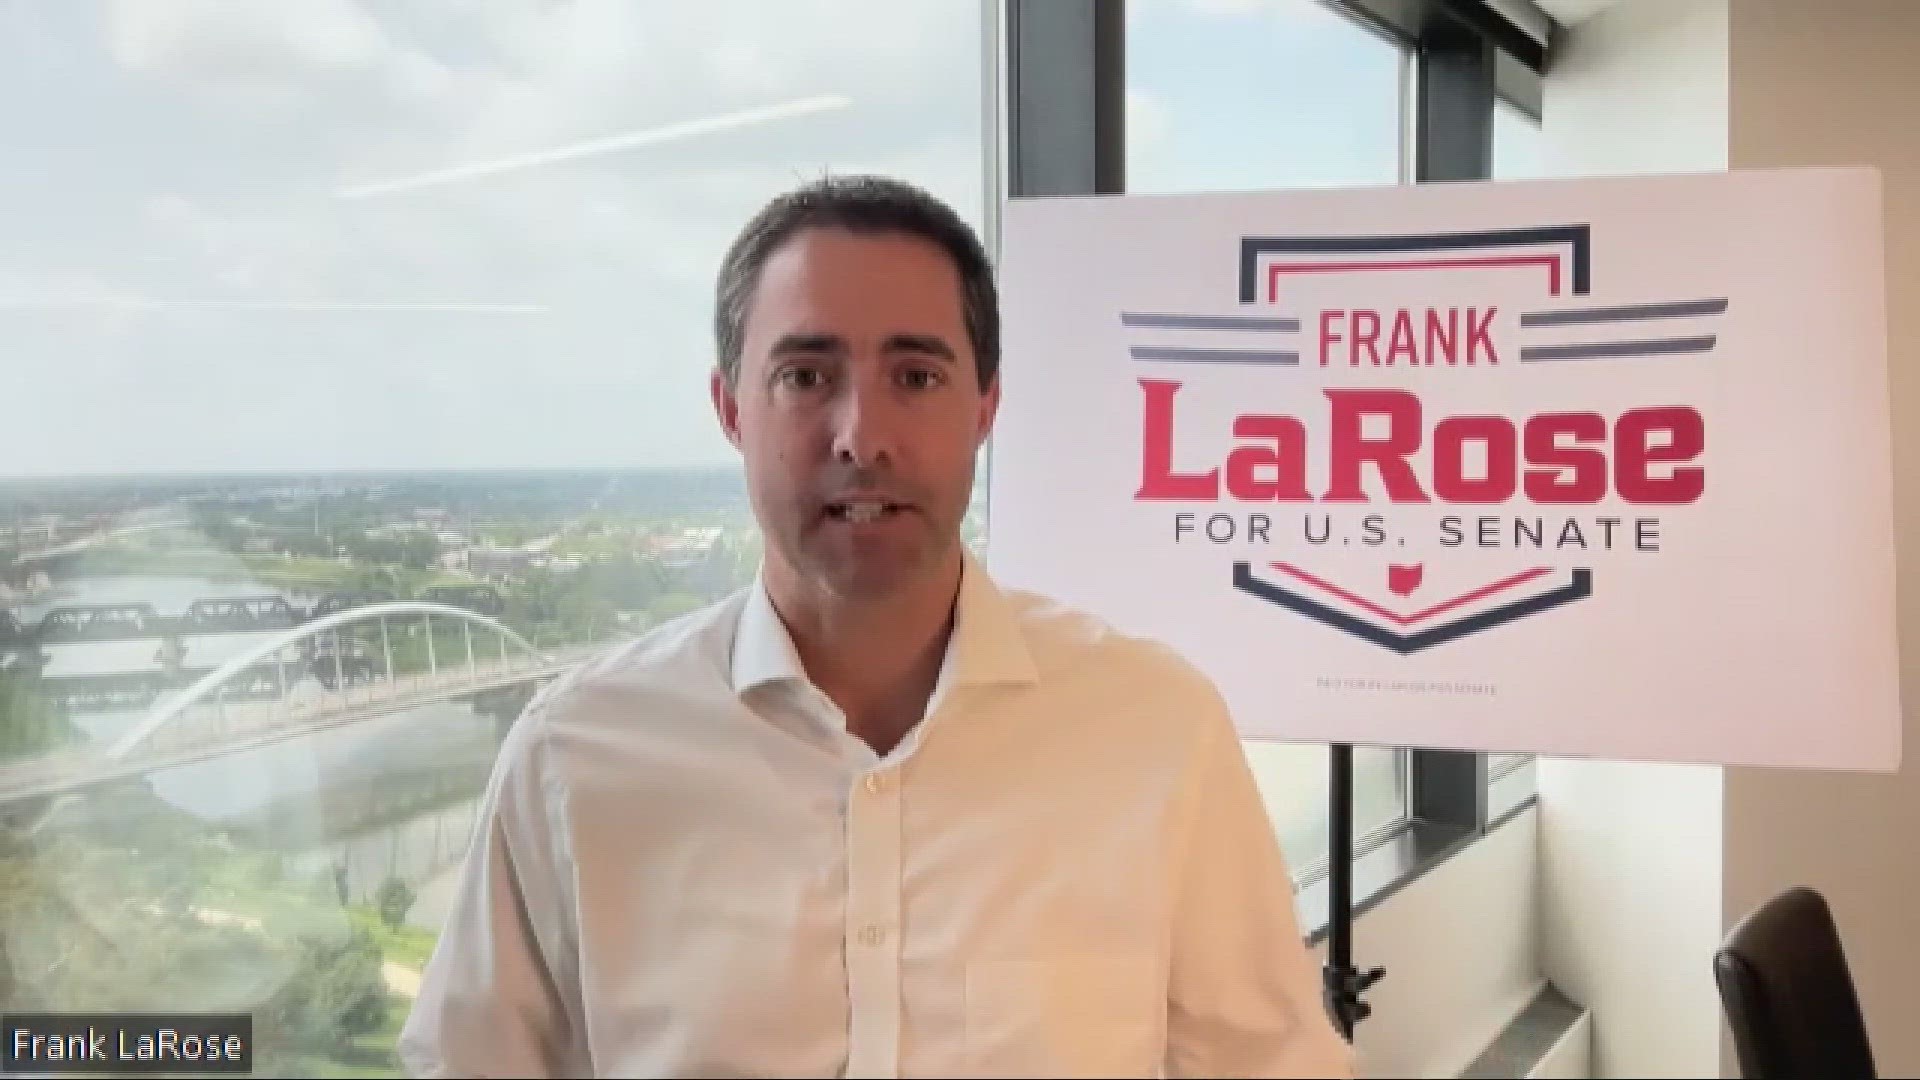 The state Libertarian Party says LaRose is illegally 'using his office and official authority to influence' the Issue 1 race. LaRose maintains that's not true.